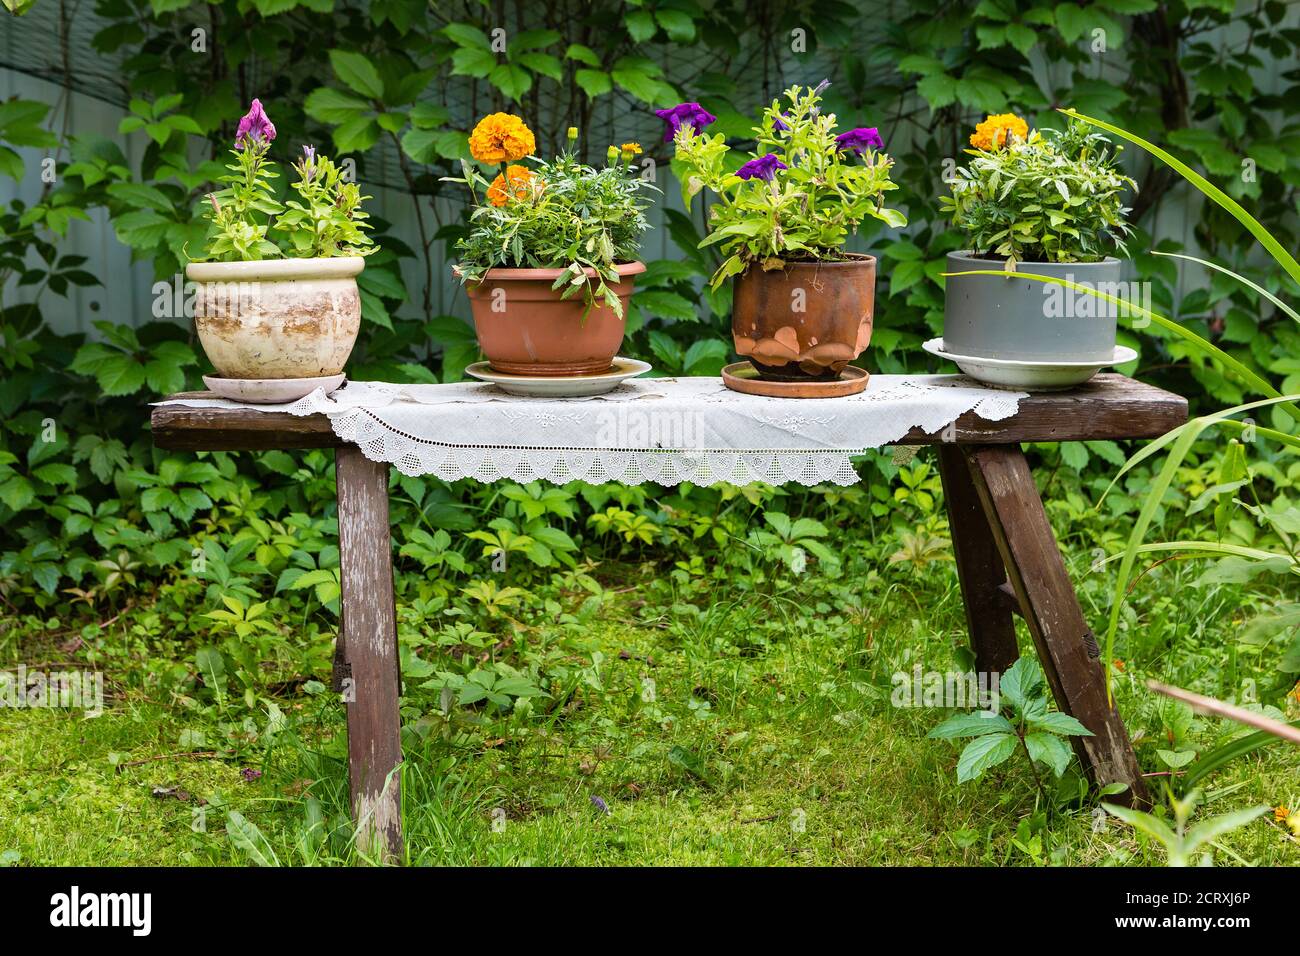 flowers in a cashto standing on a wooden bench as a decorative element of the garden Stock Photo